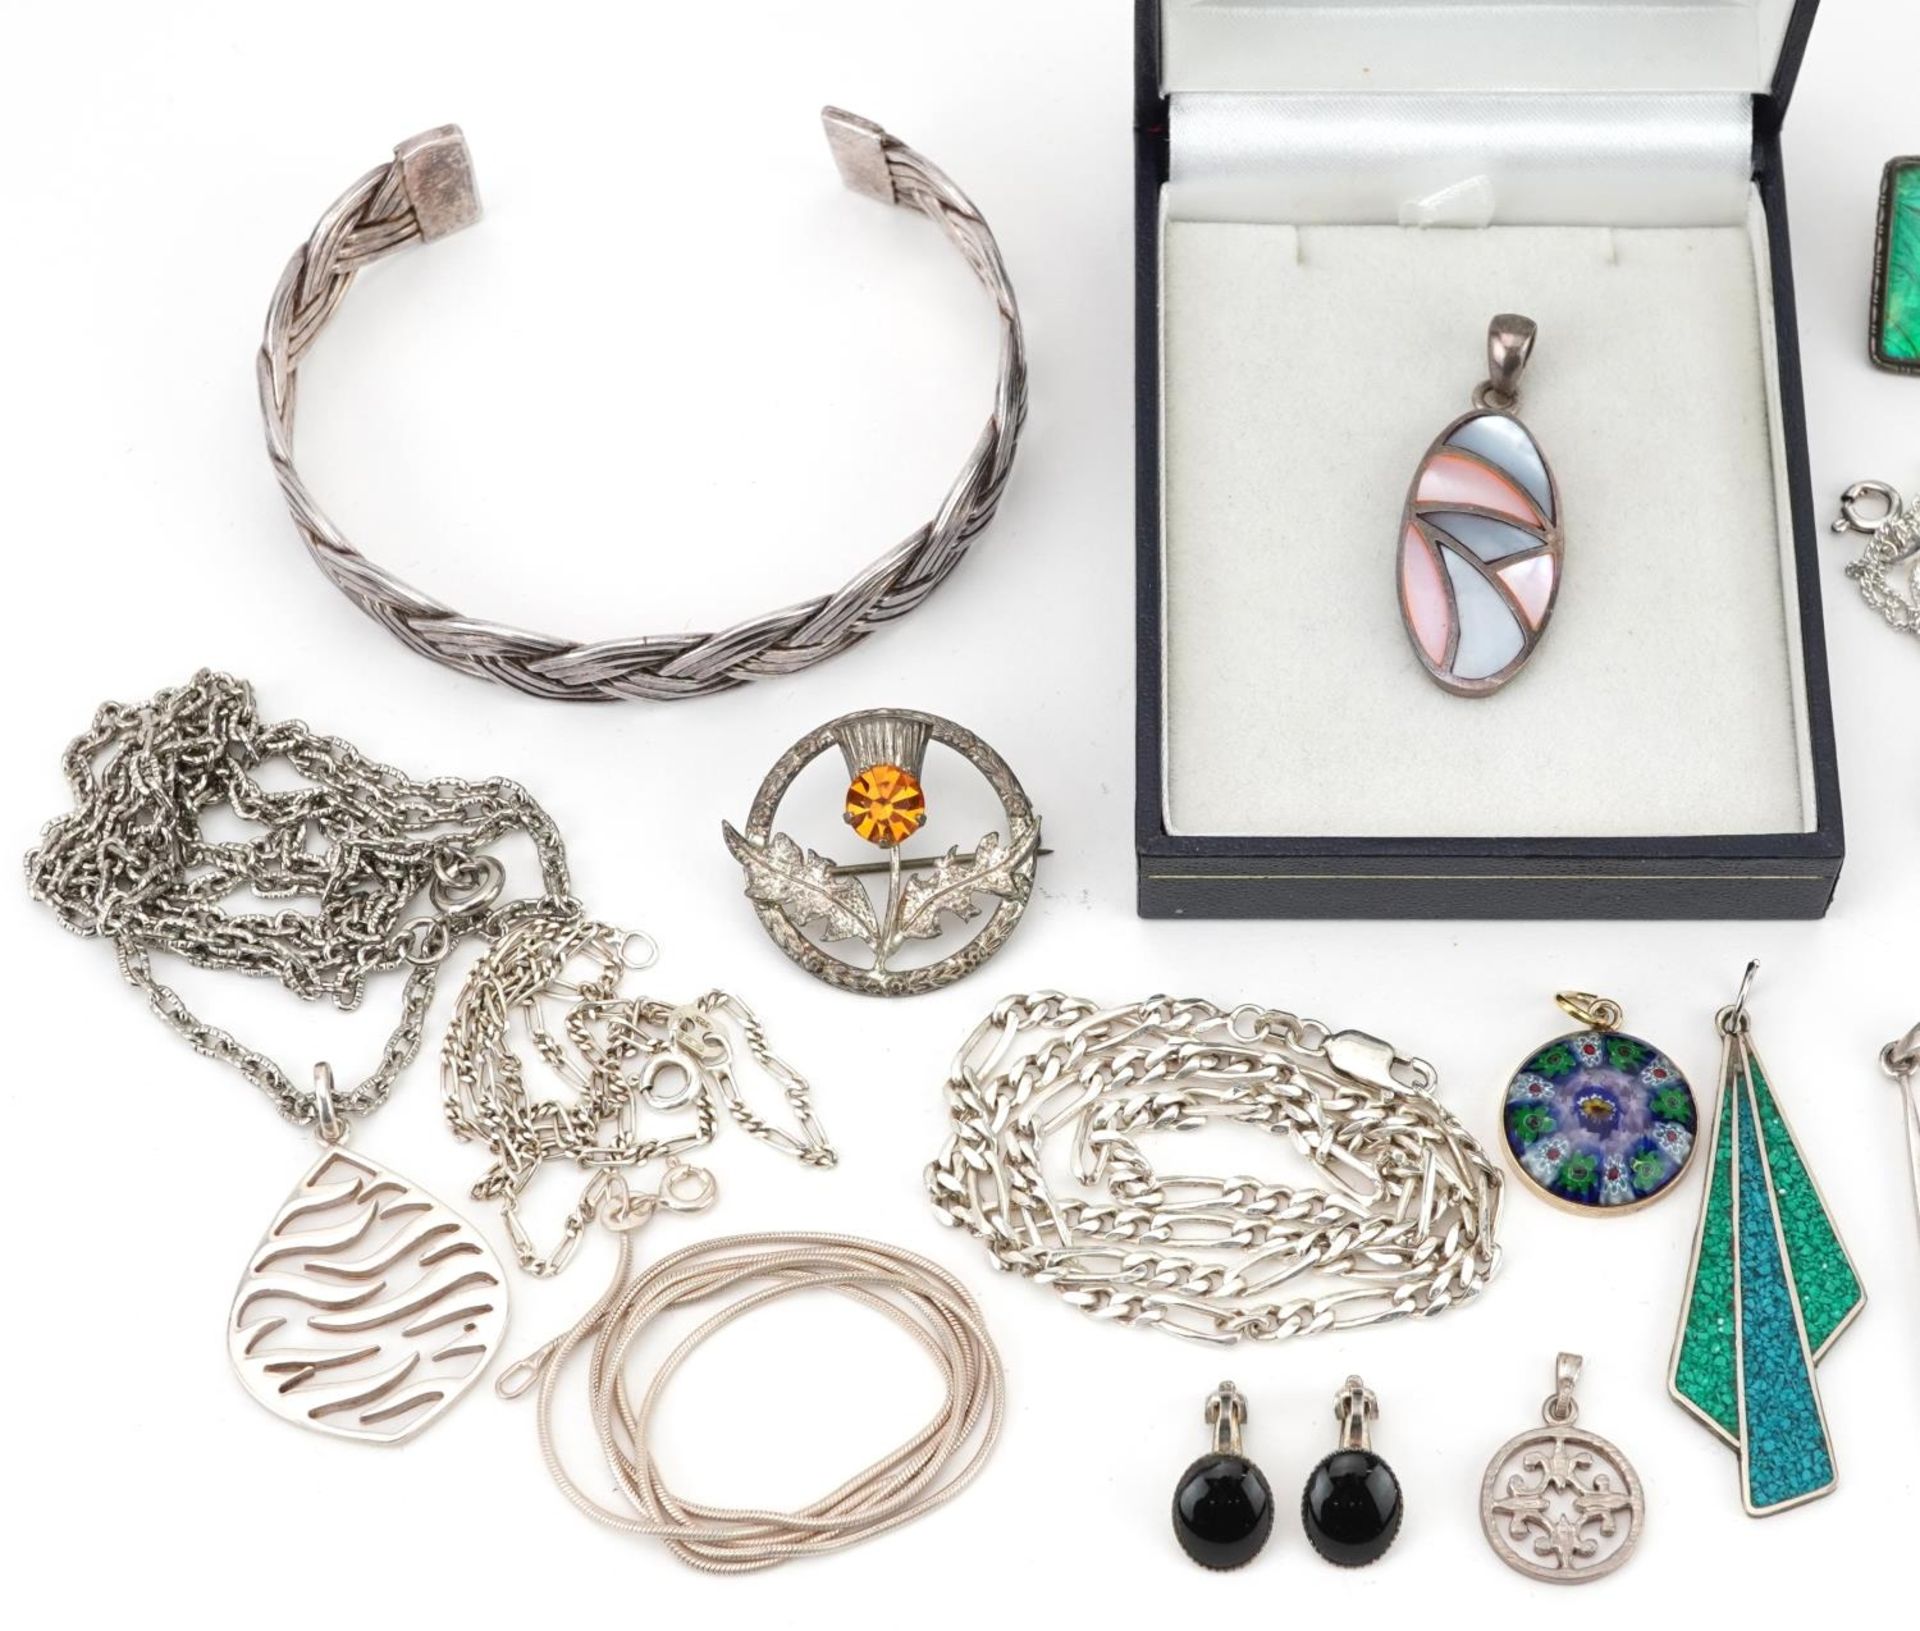 Silver and white metal jewellery including a black onyx jewellery suite, millefiori glass pendant, - Image 2 of 4